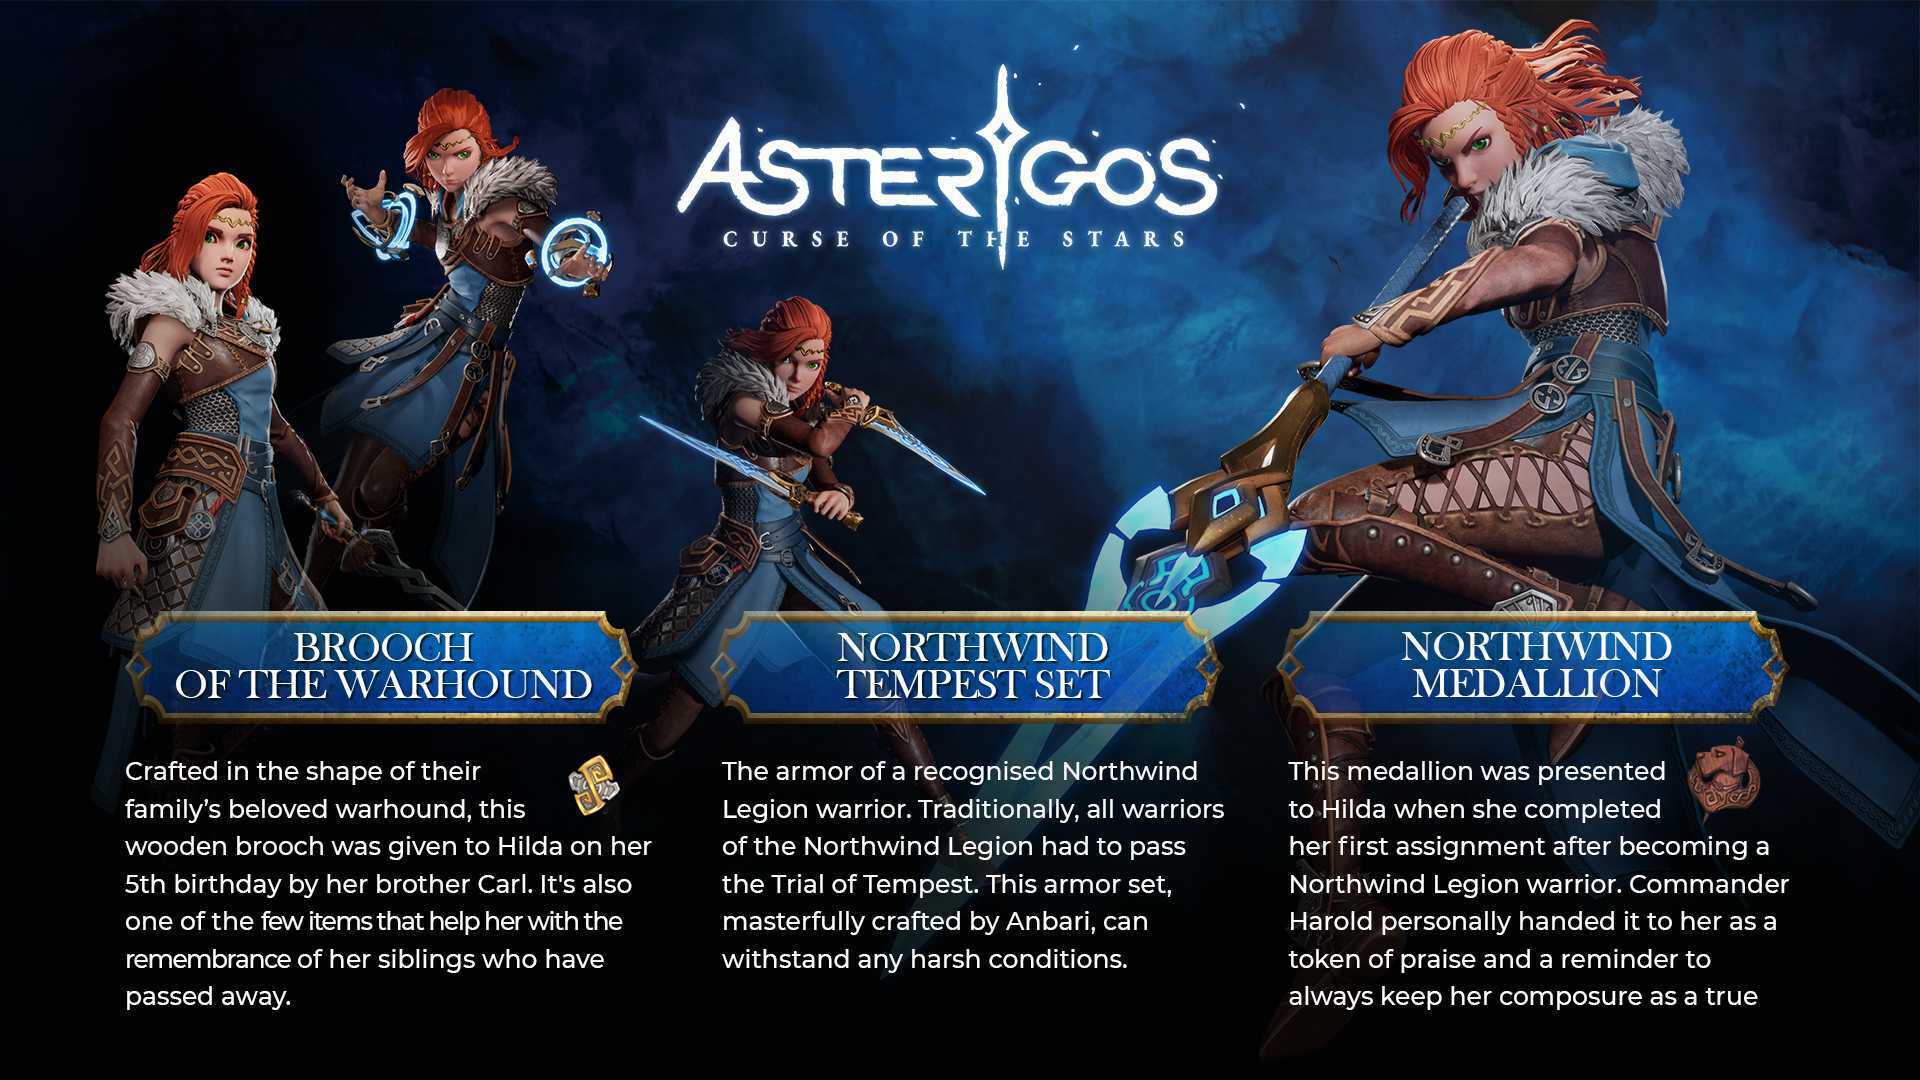 for windows download Asterigos: Curse of the Stars